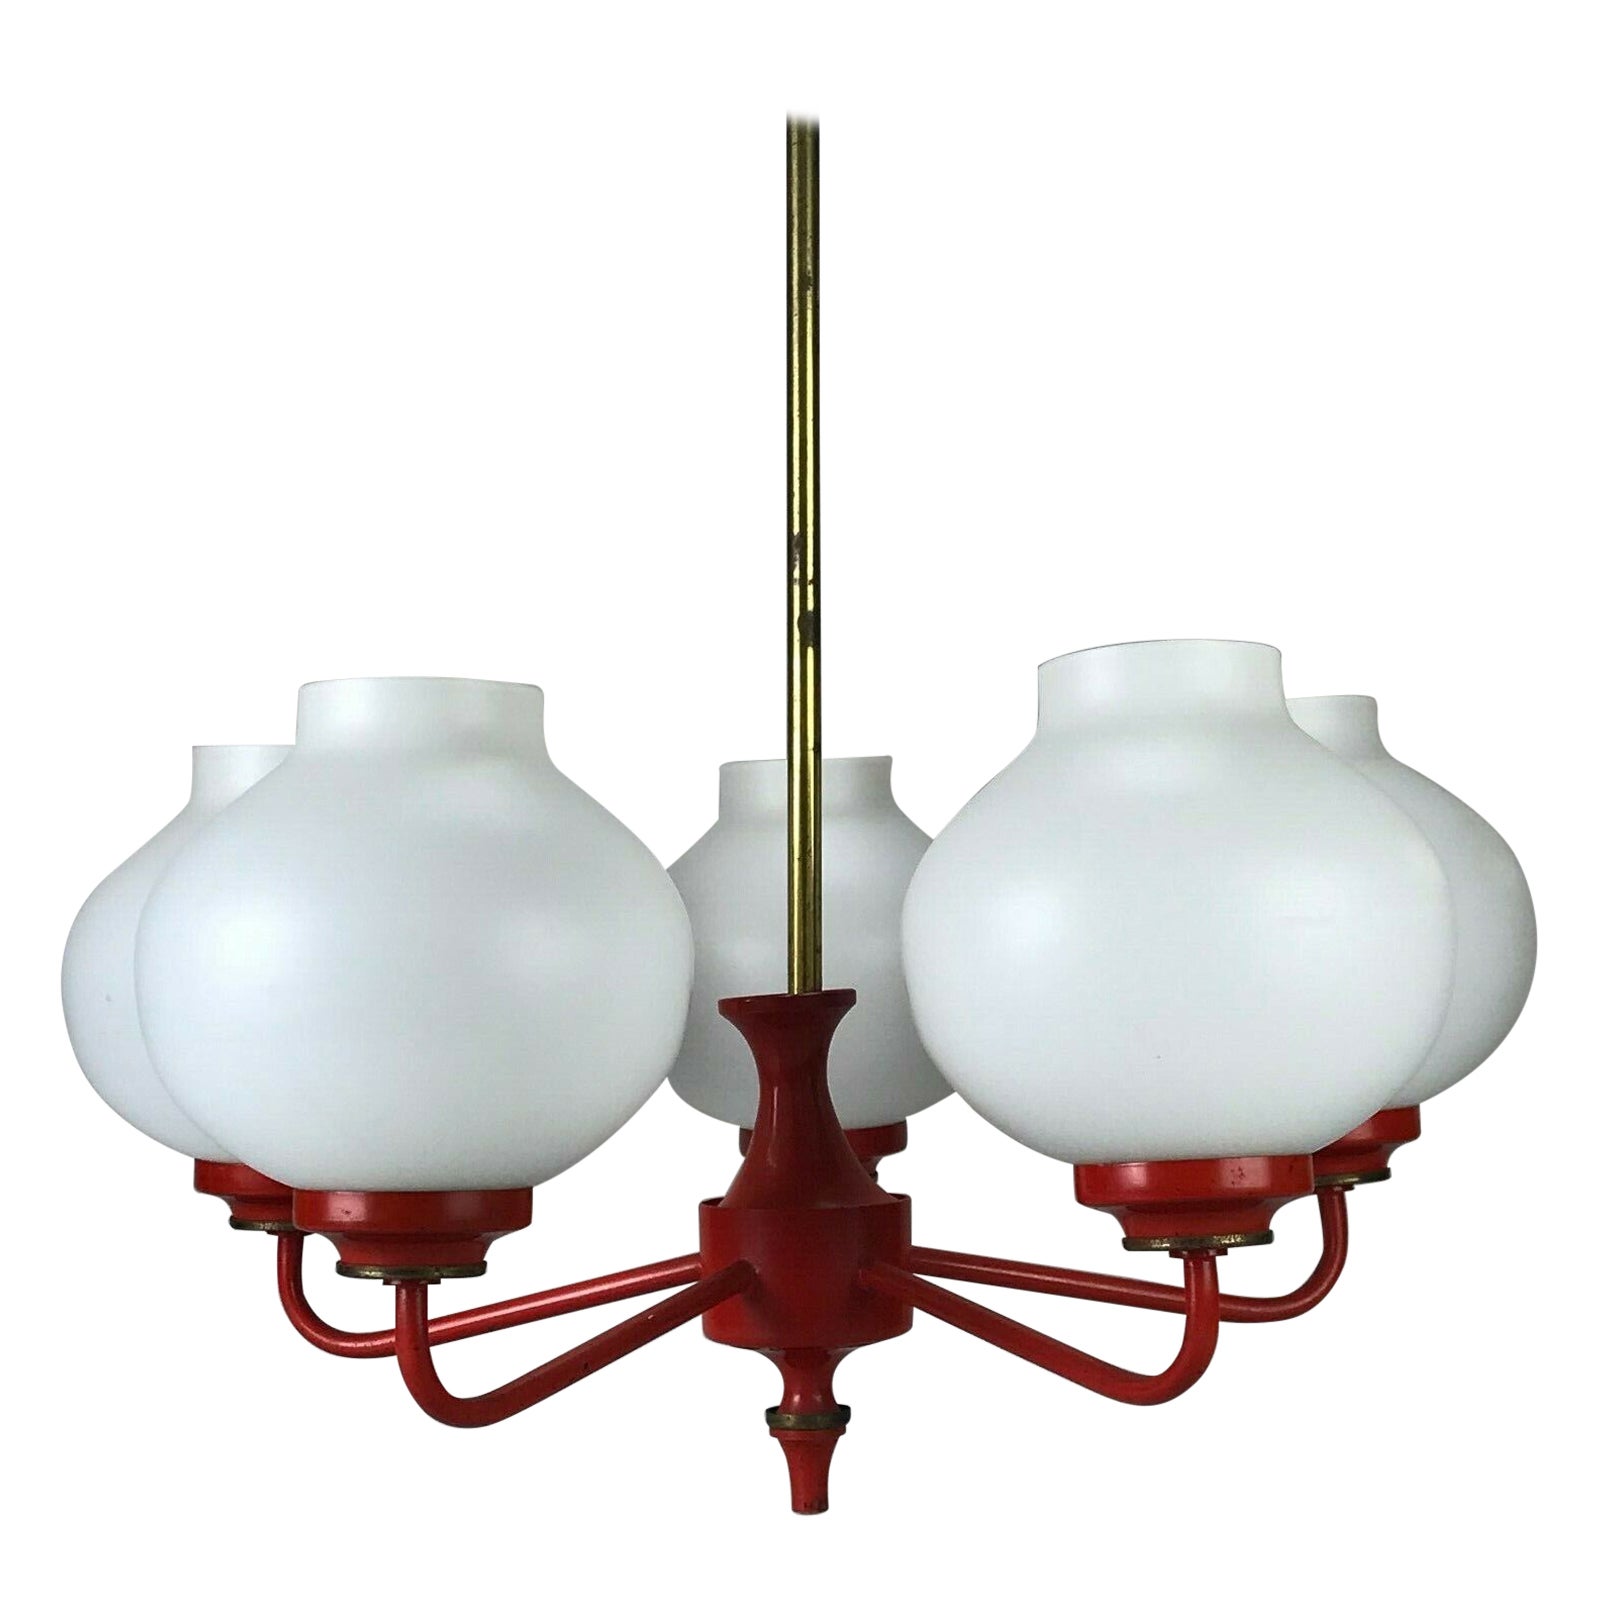 70s Lamp Light Ceiling Lamp Chandelier Ball Lamp Space Age Design For Sale